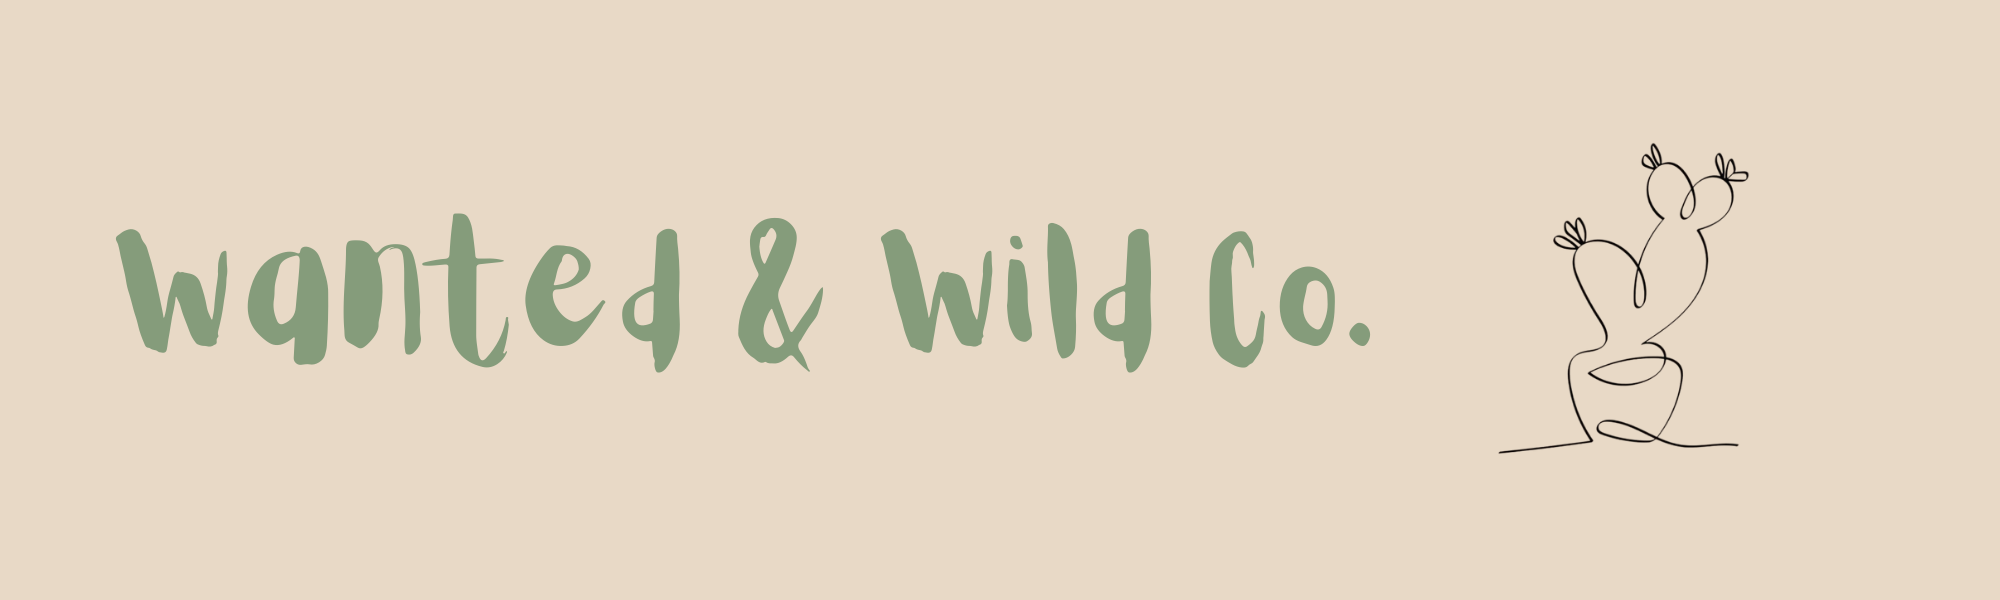 Wanted & Wild Co.